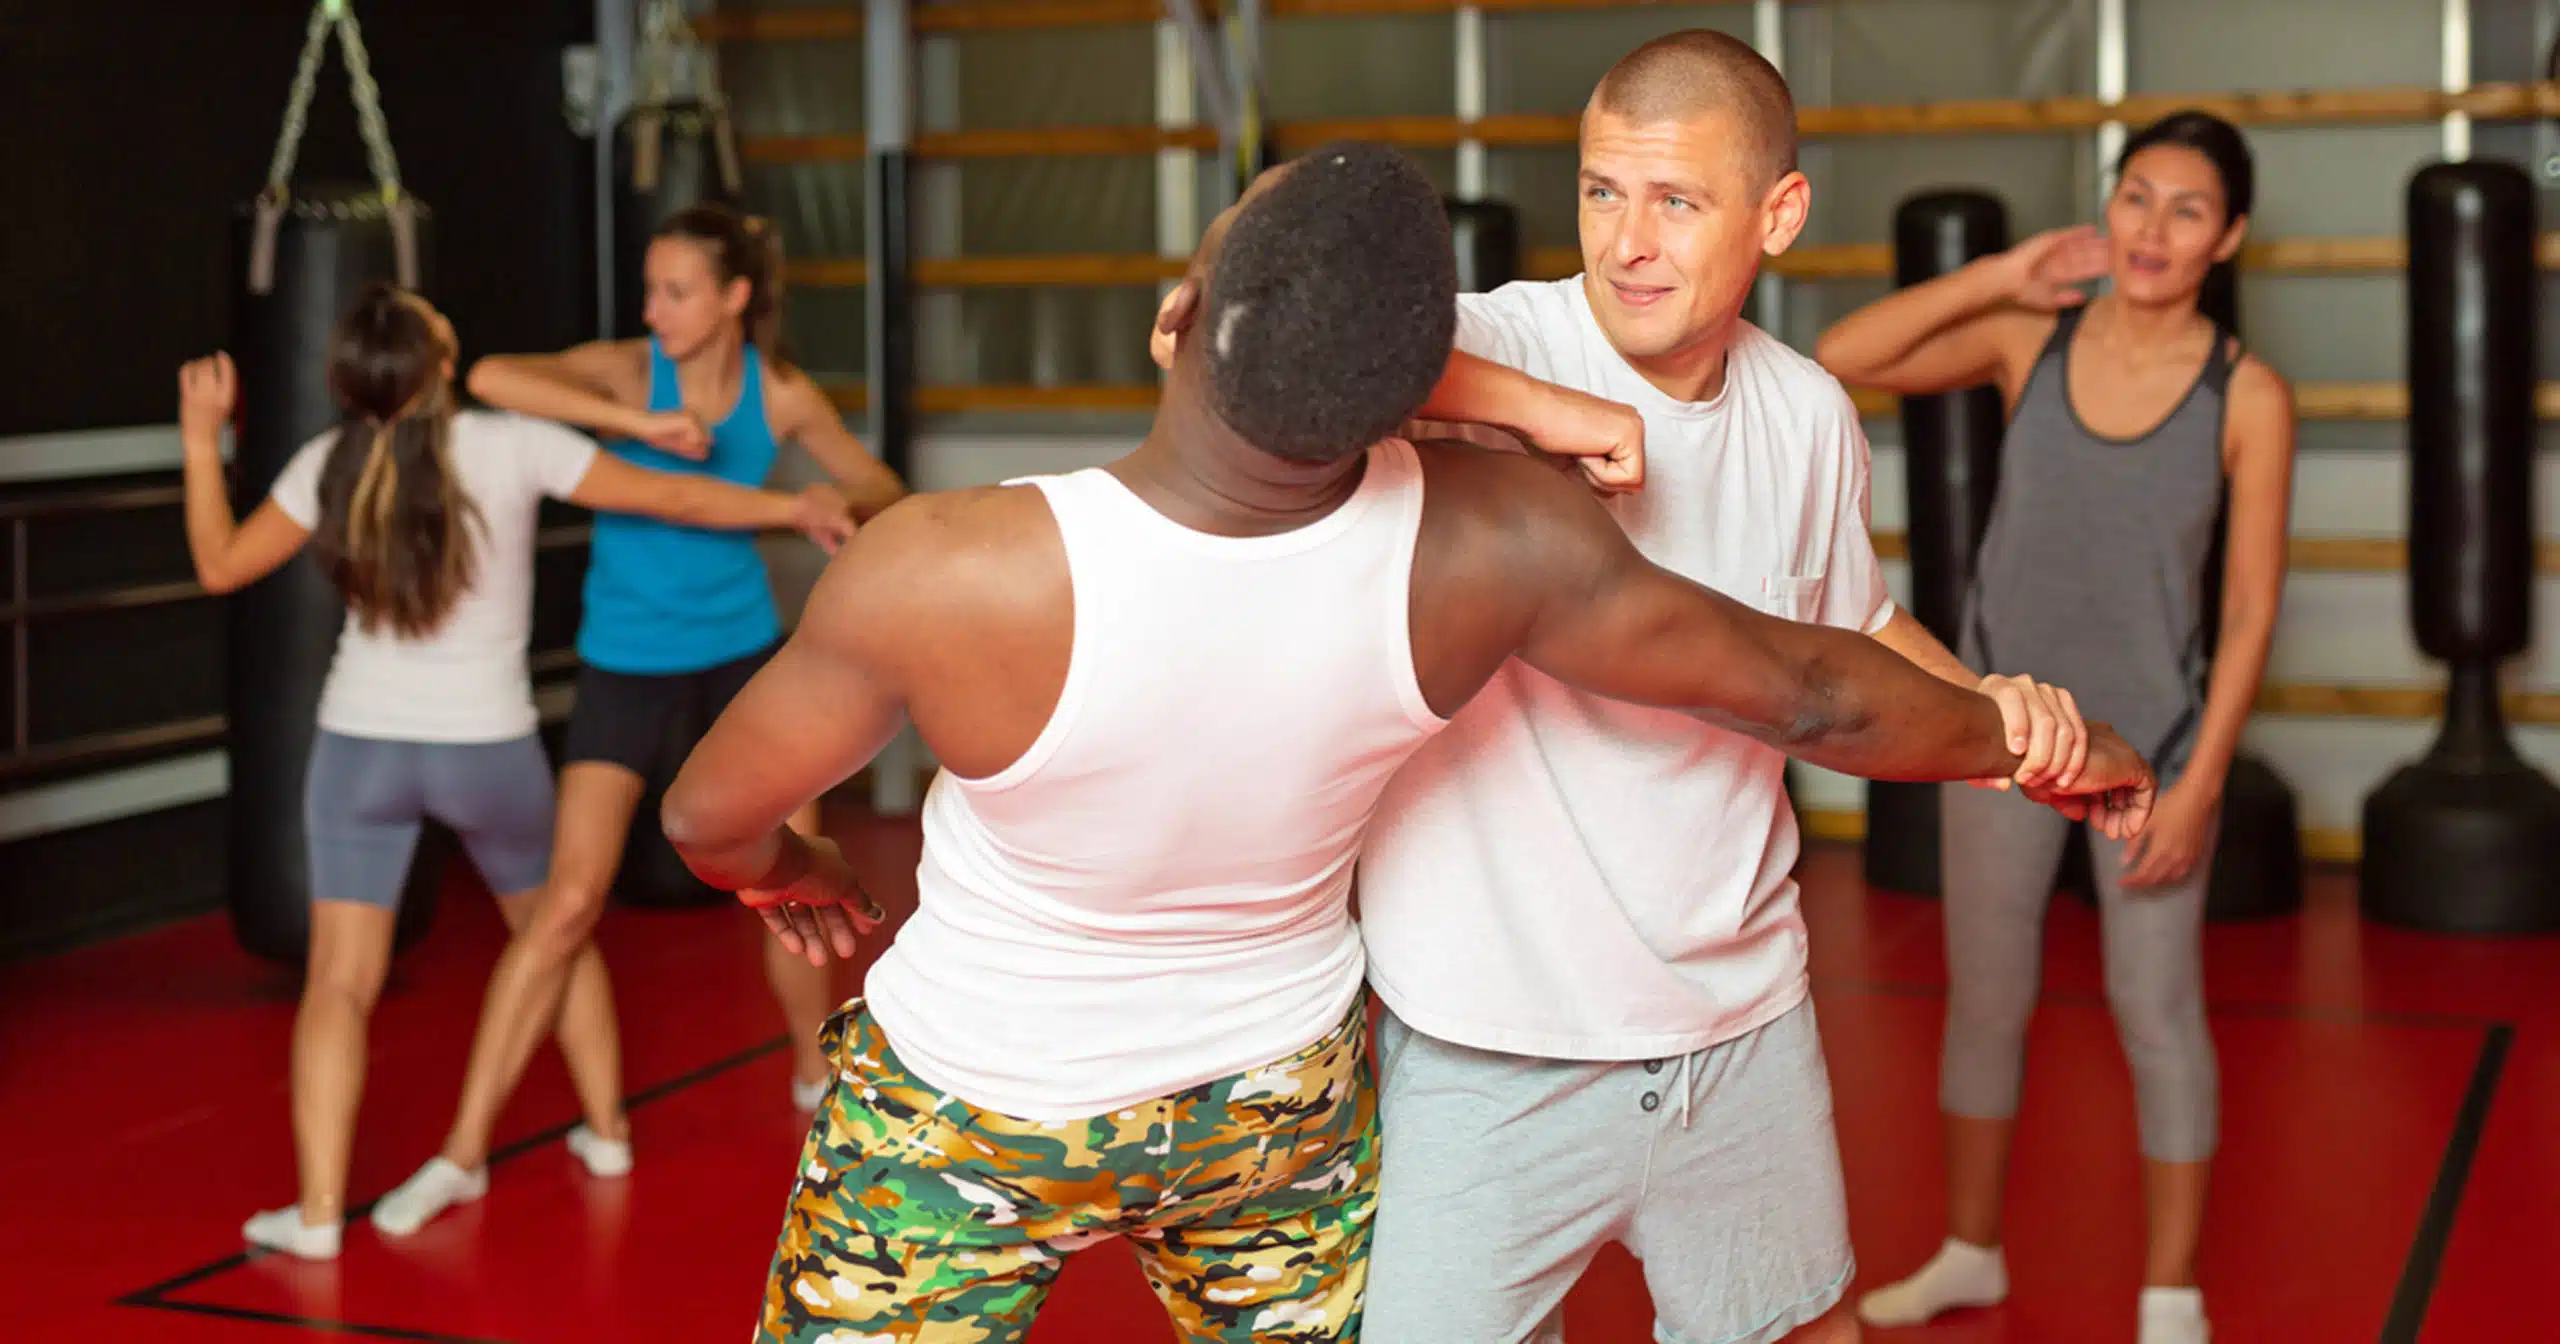 Safety tips - men and women taking self-defense class